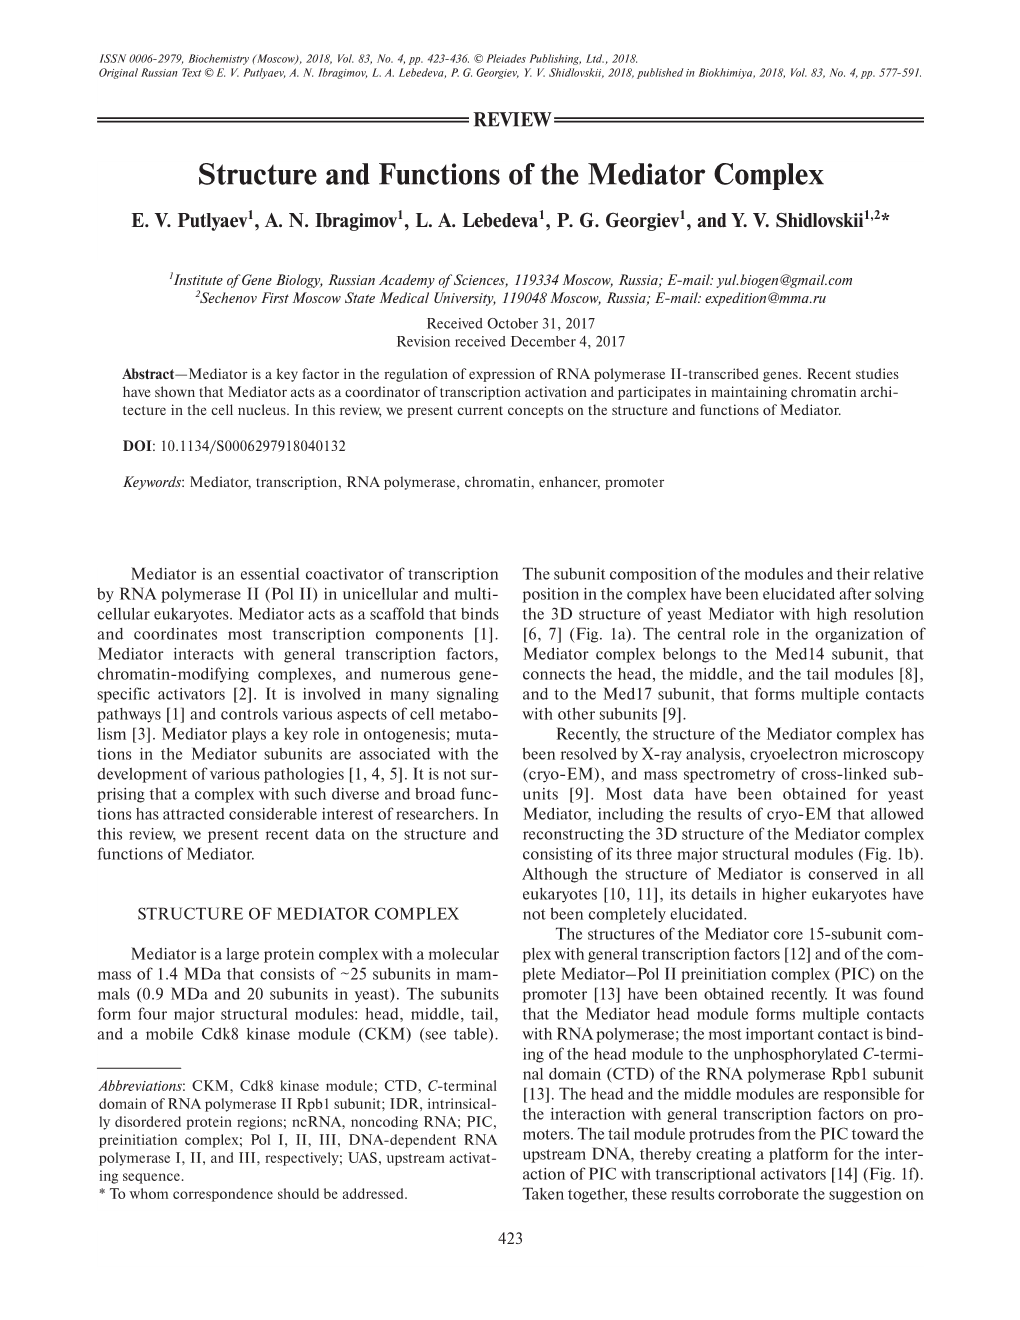 Structure and Functions of the Mediator Complex